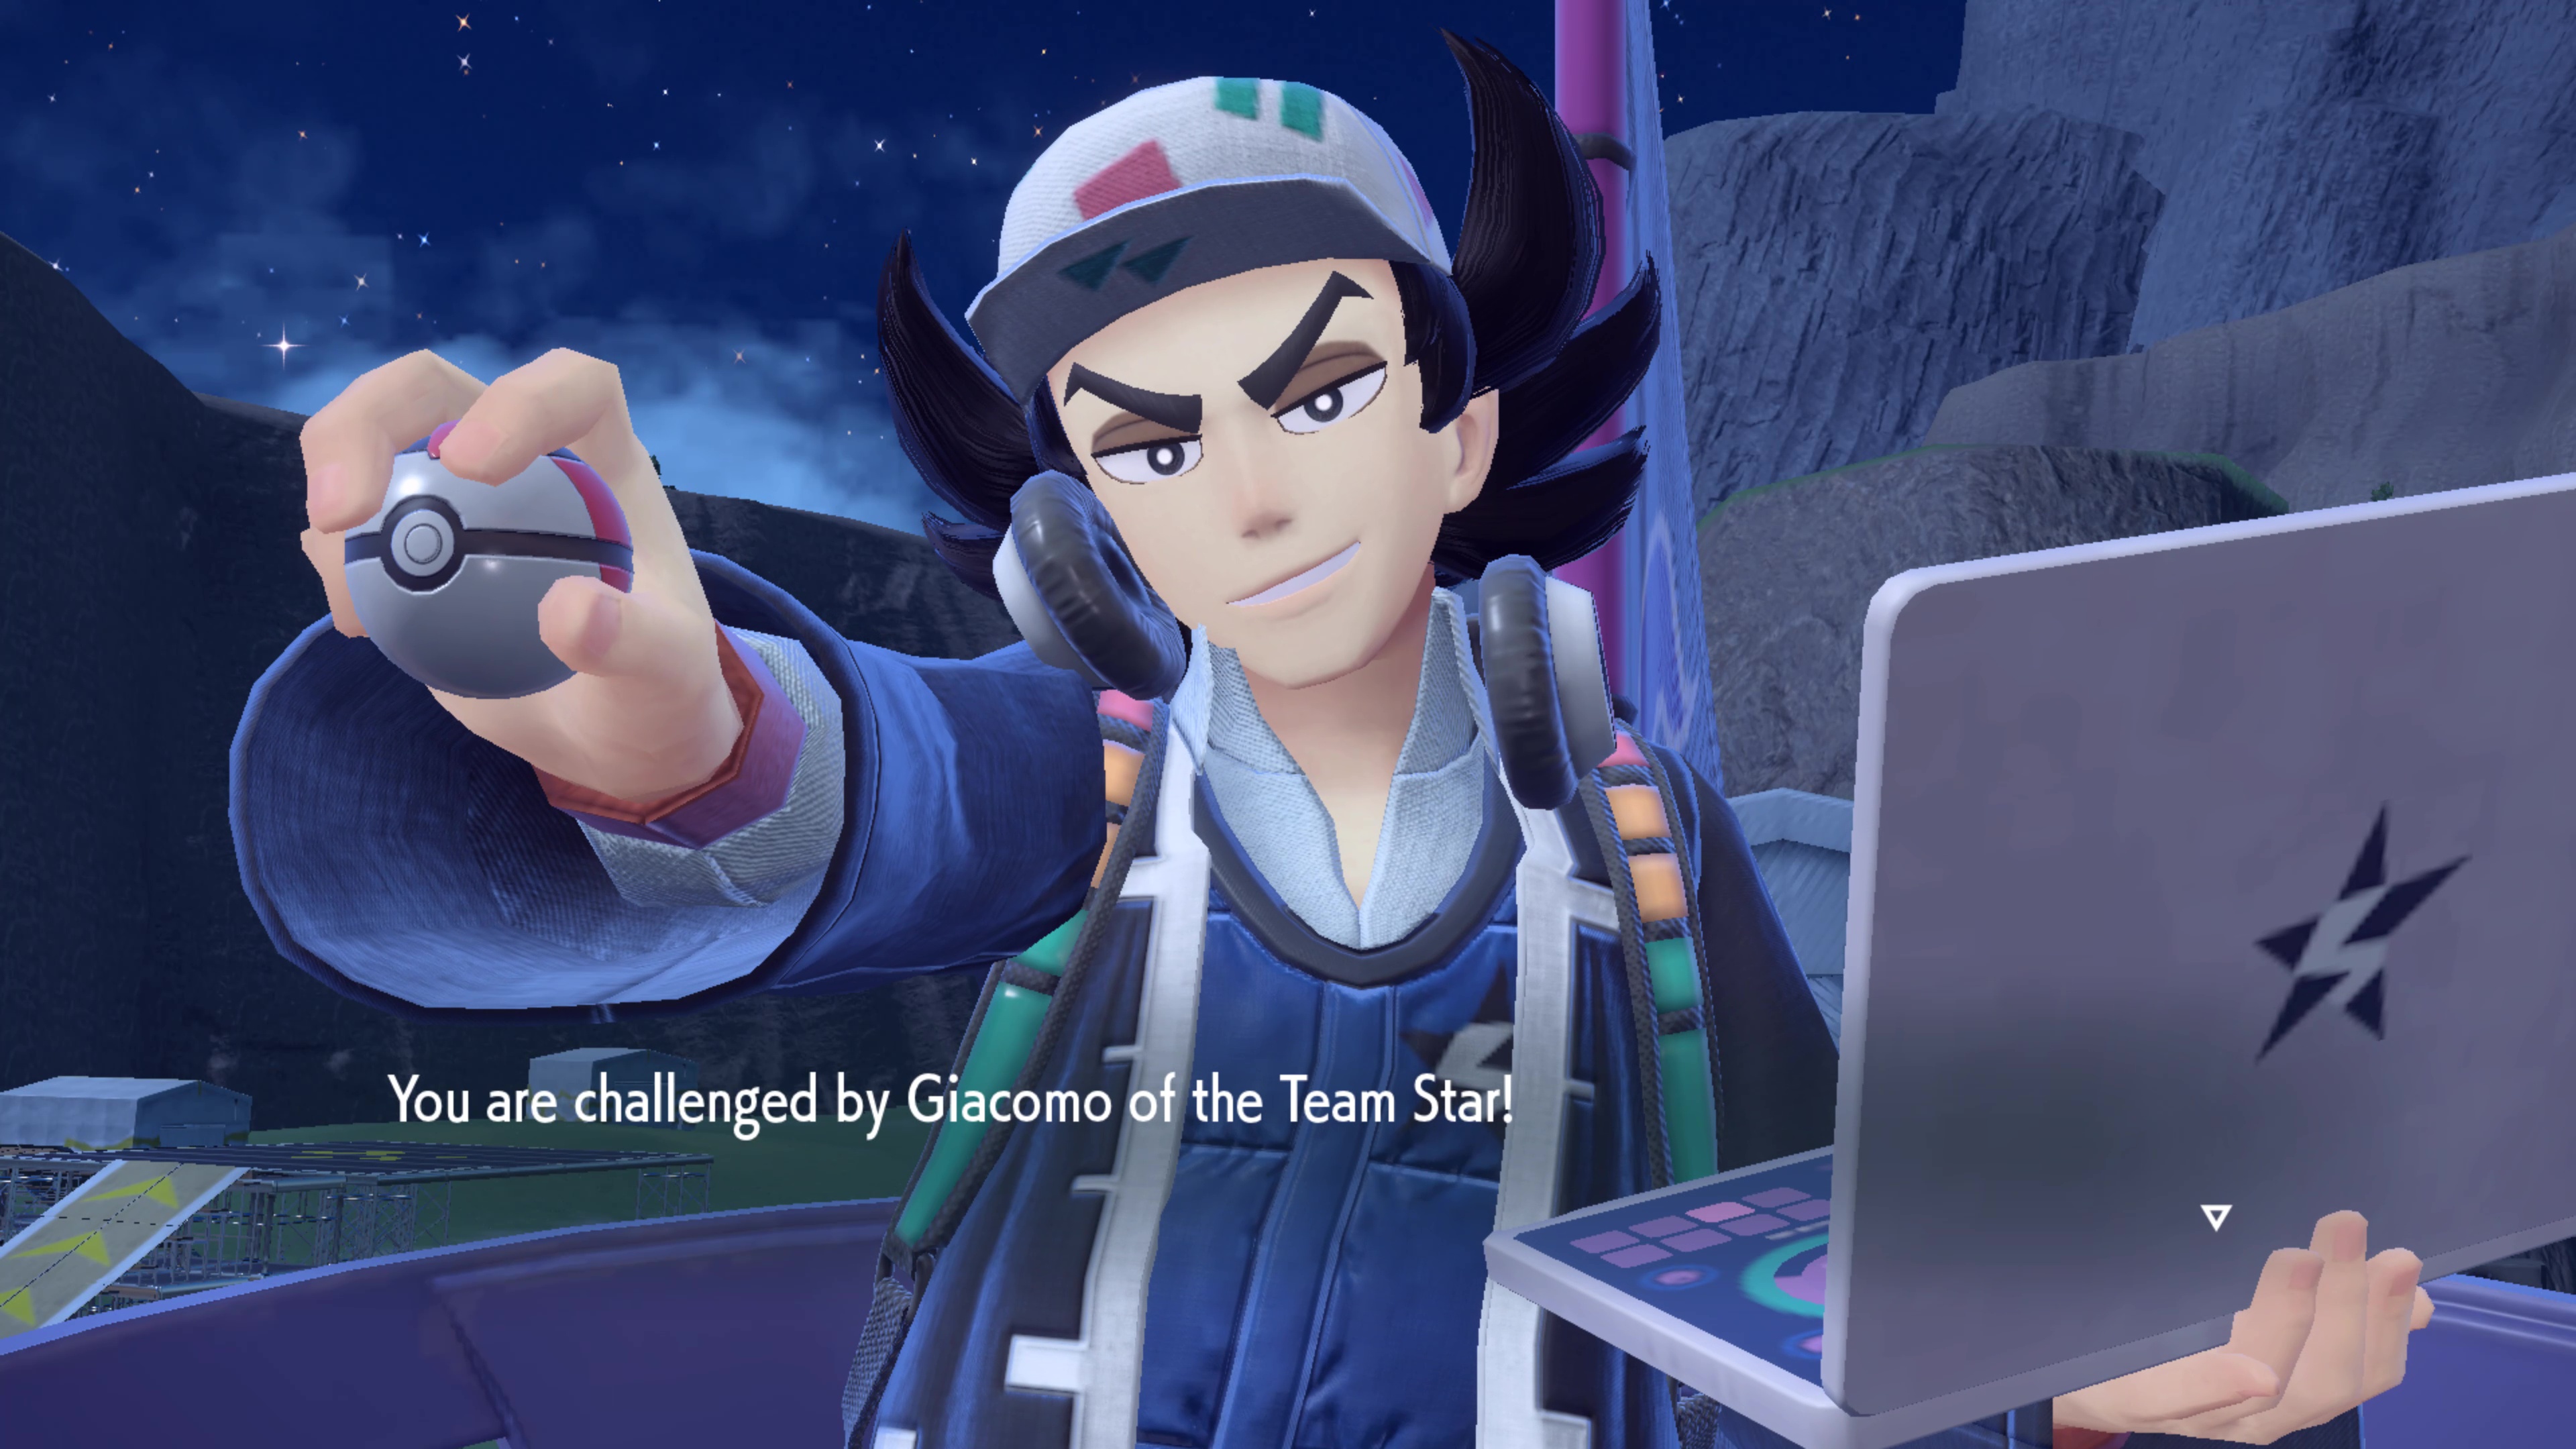 Giacomo is the first of the Team Star leaders you can take on.